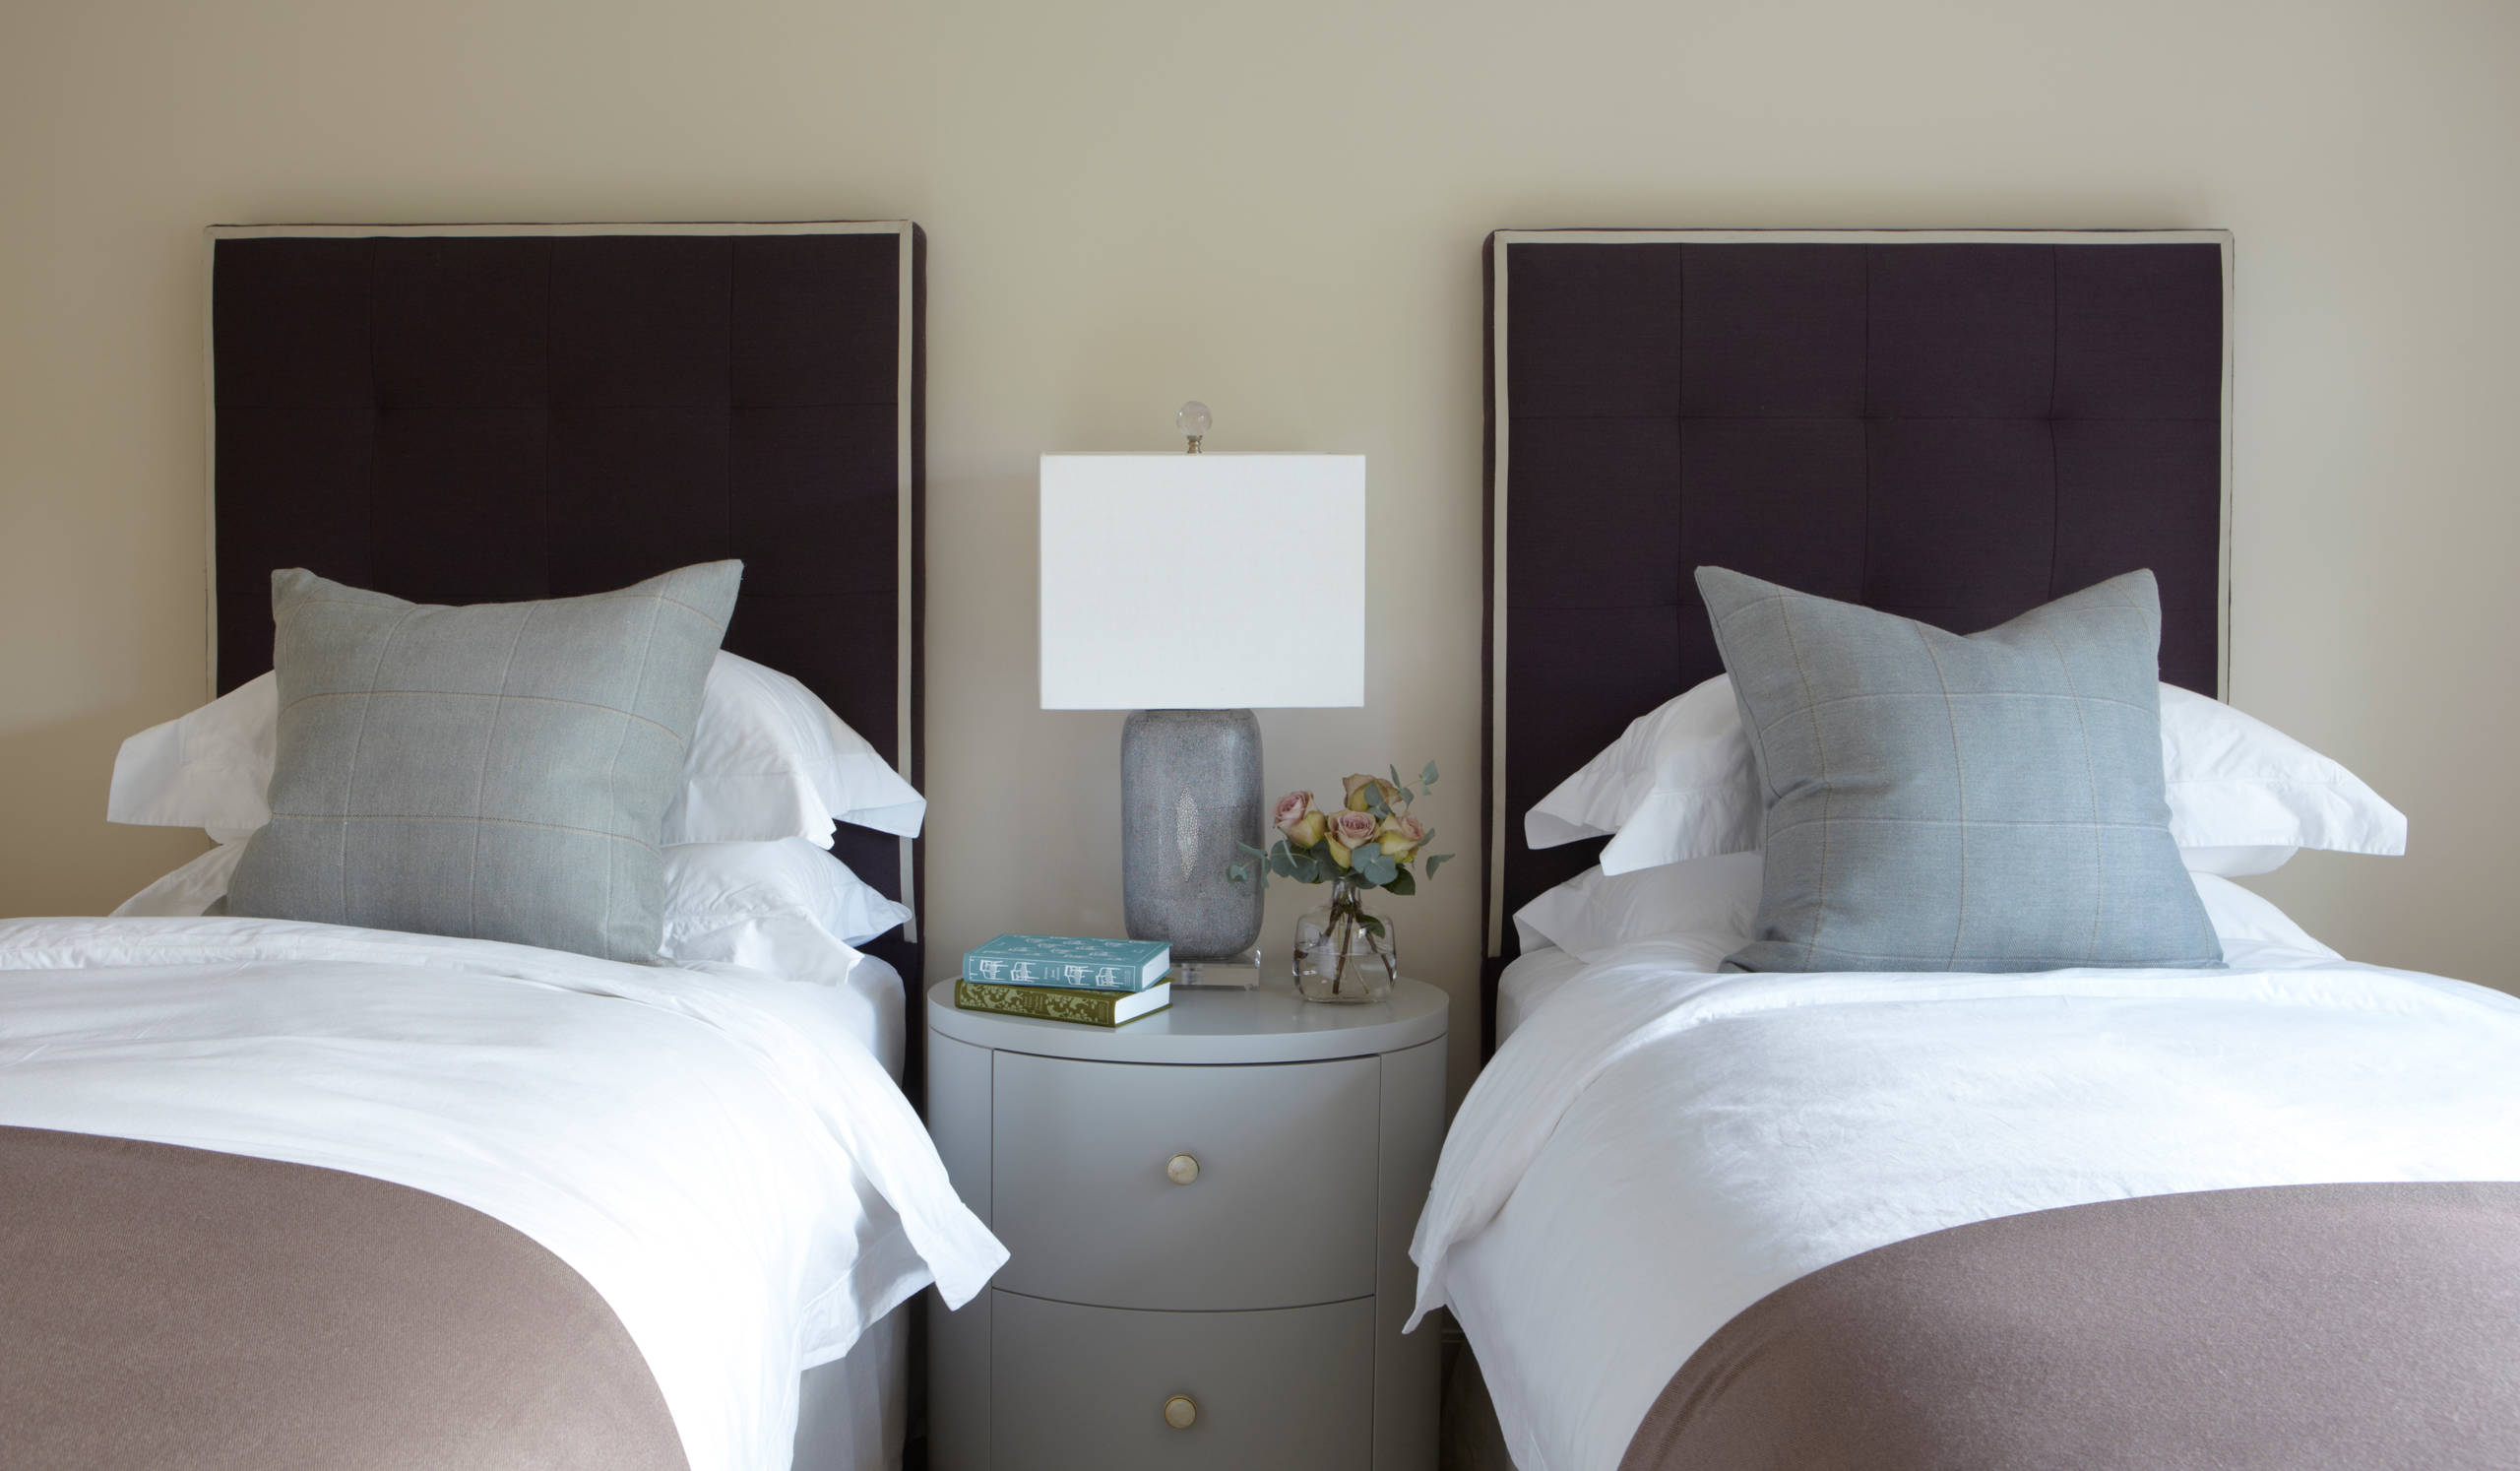 Twin Bed Guest Room Houzz, Guest Room With 2 Twin Beds